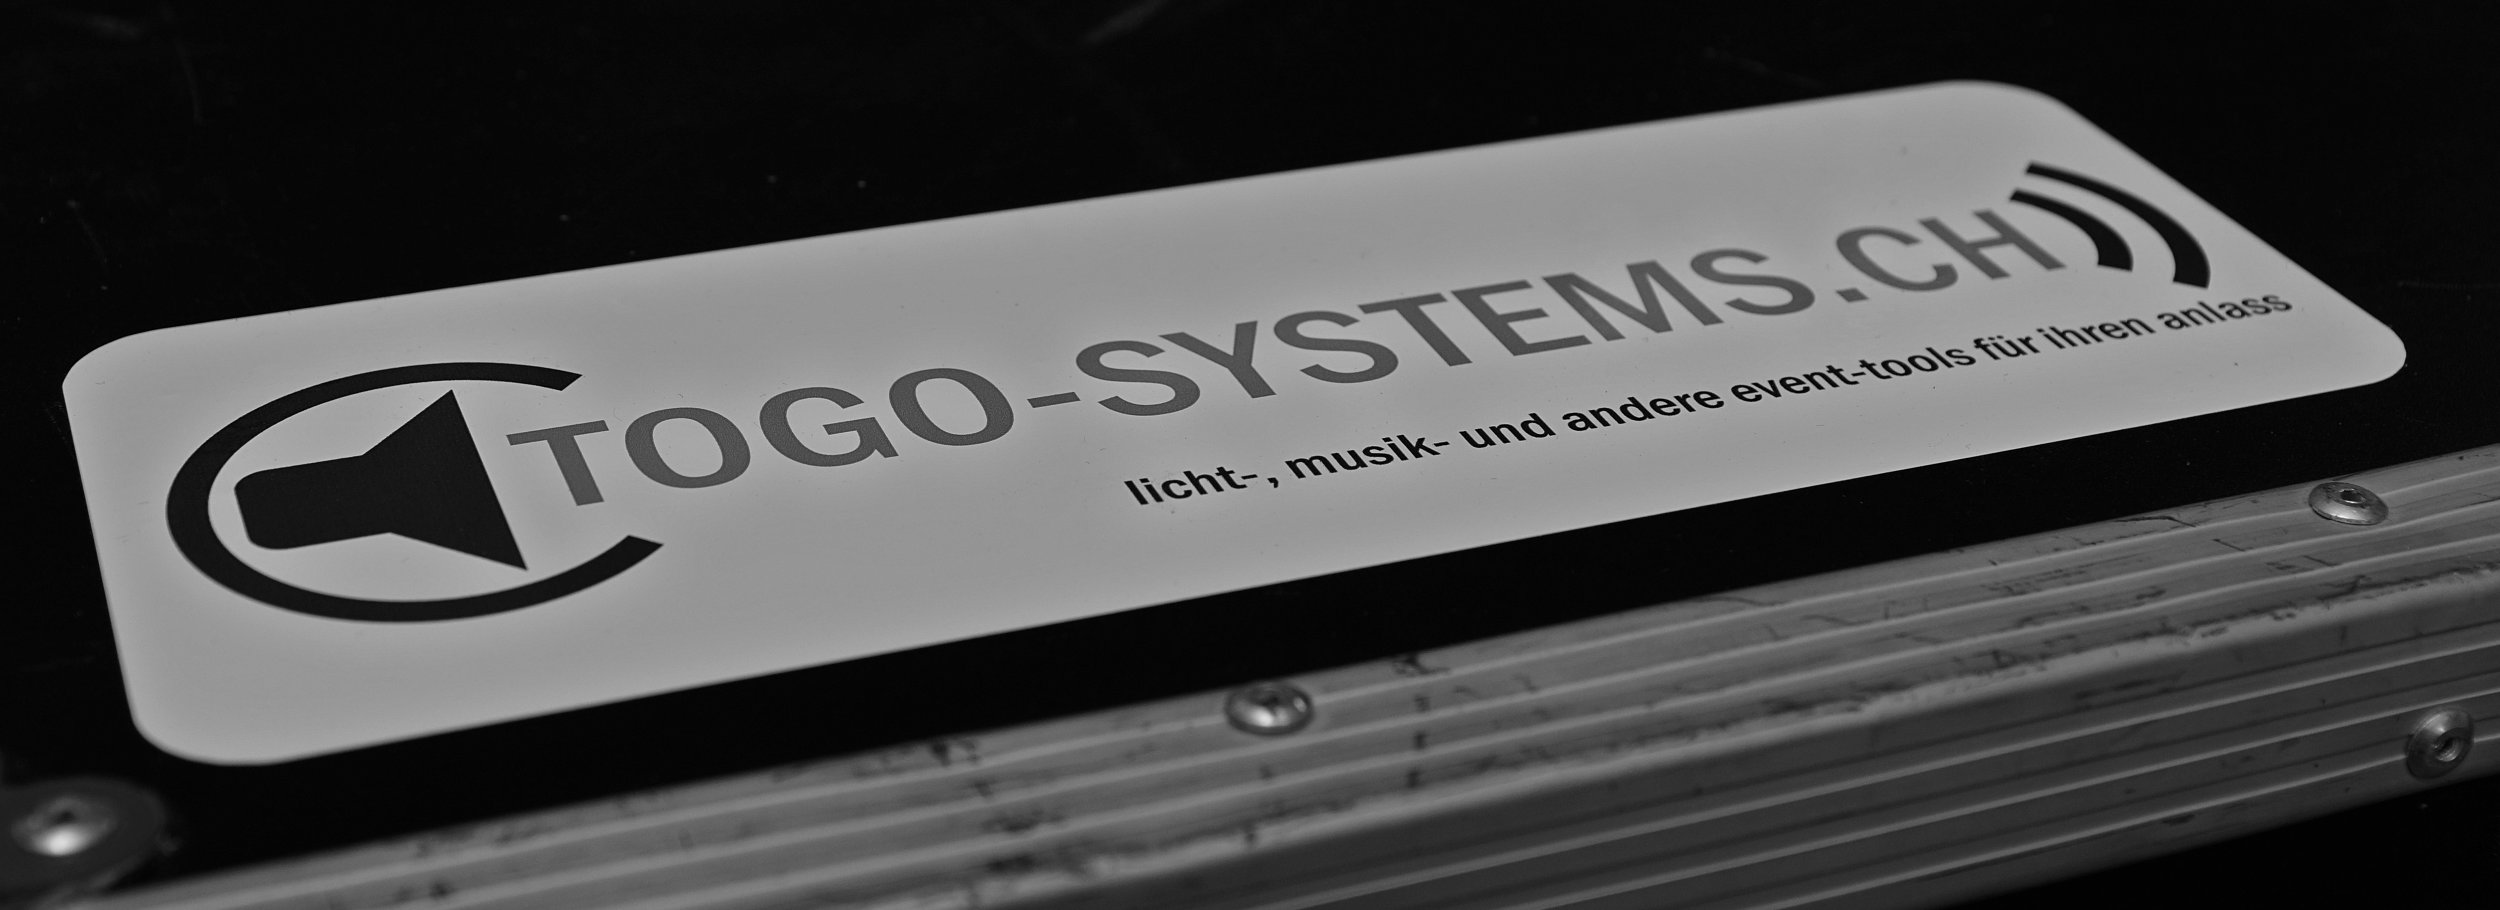 togo-systems.ch